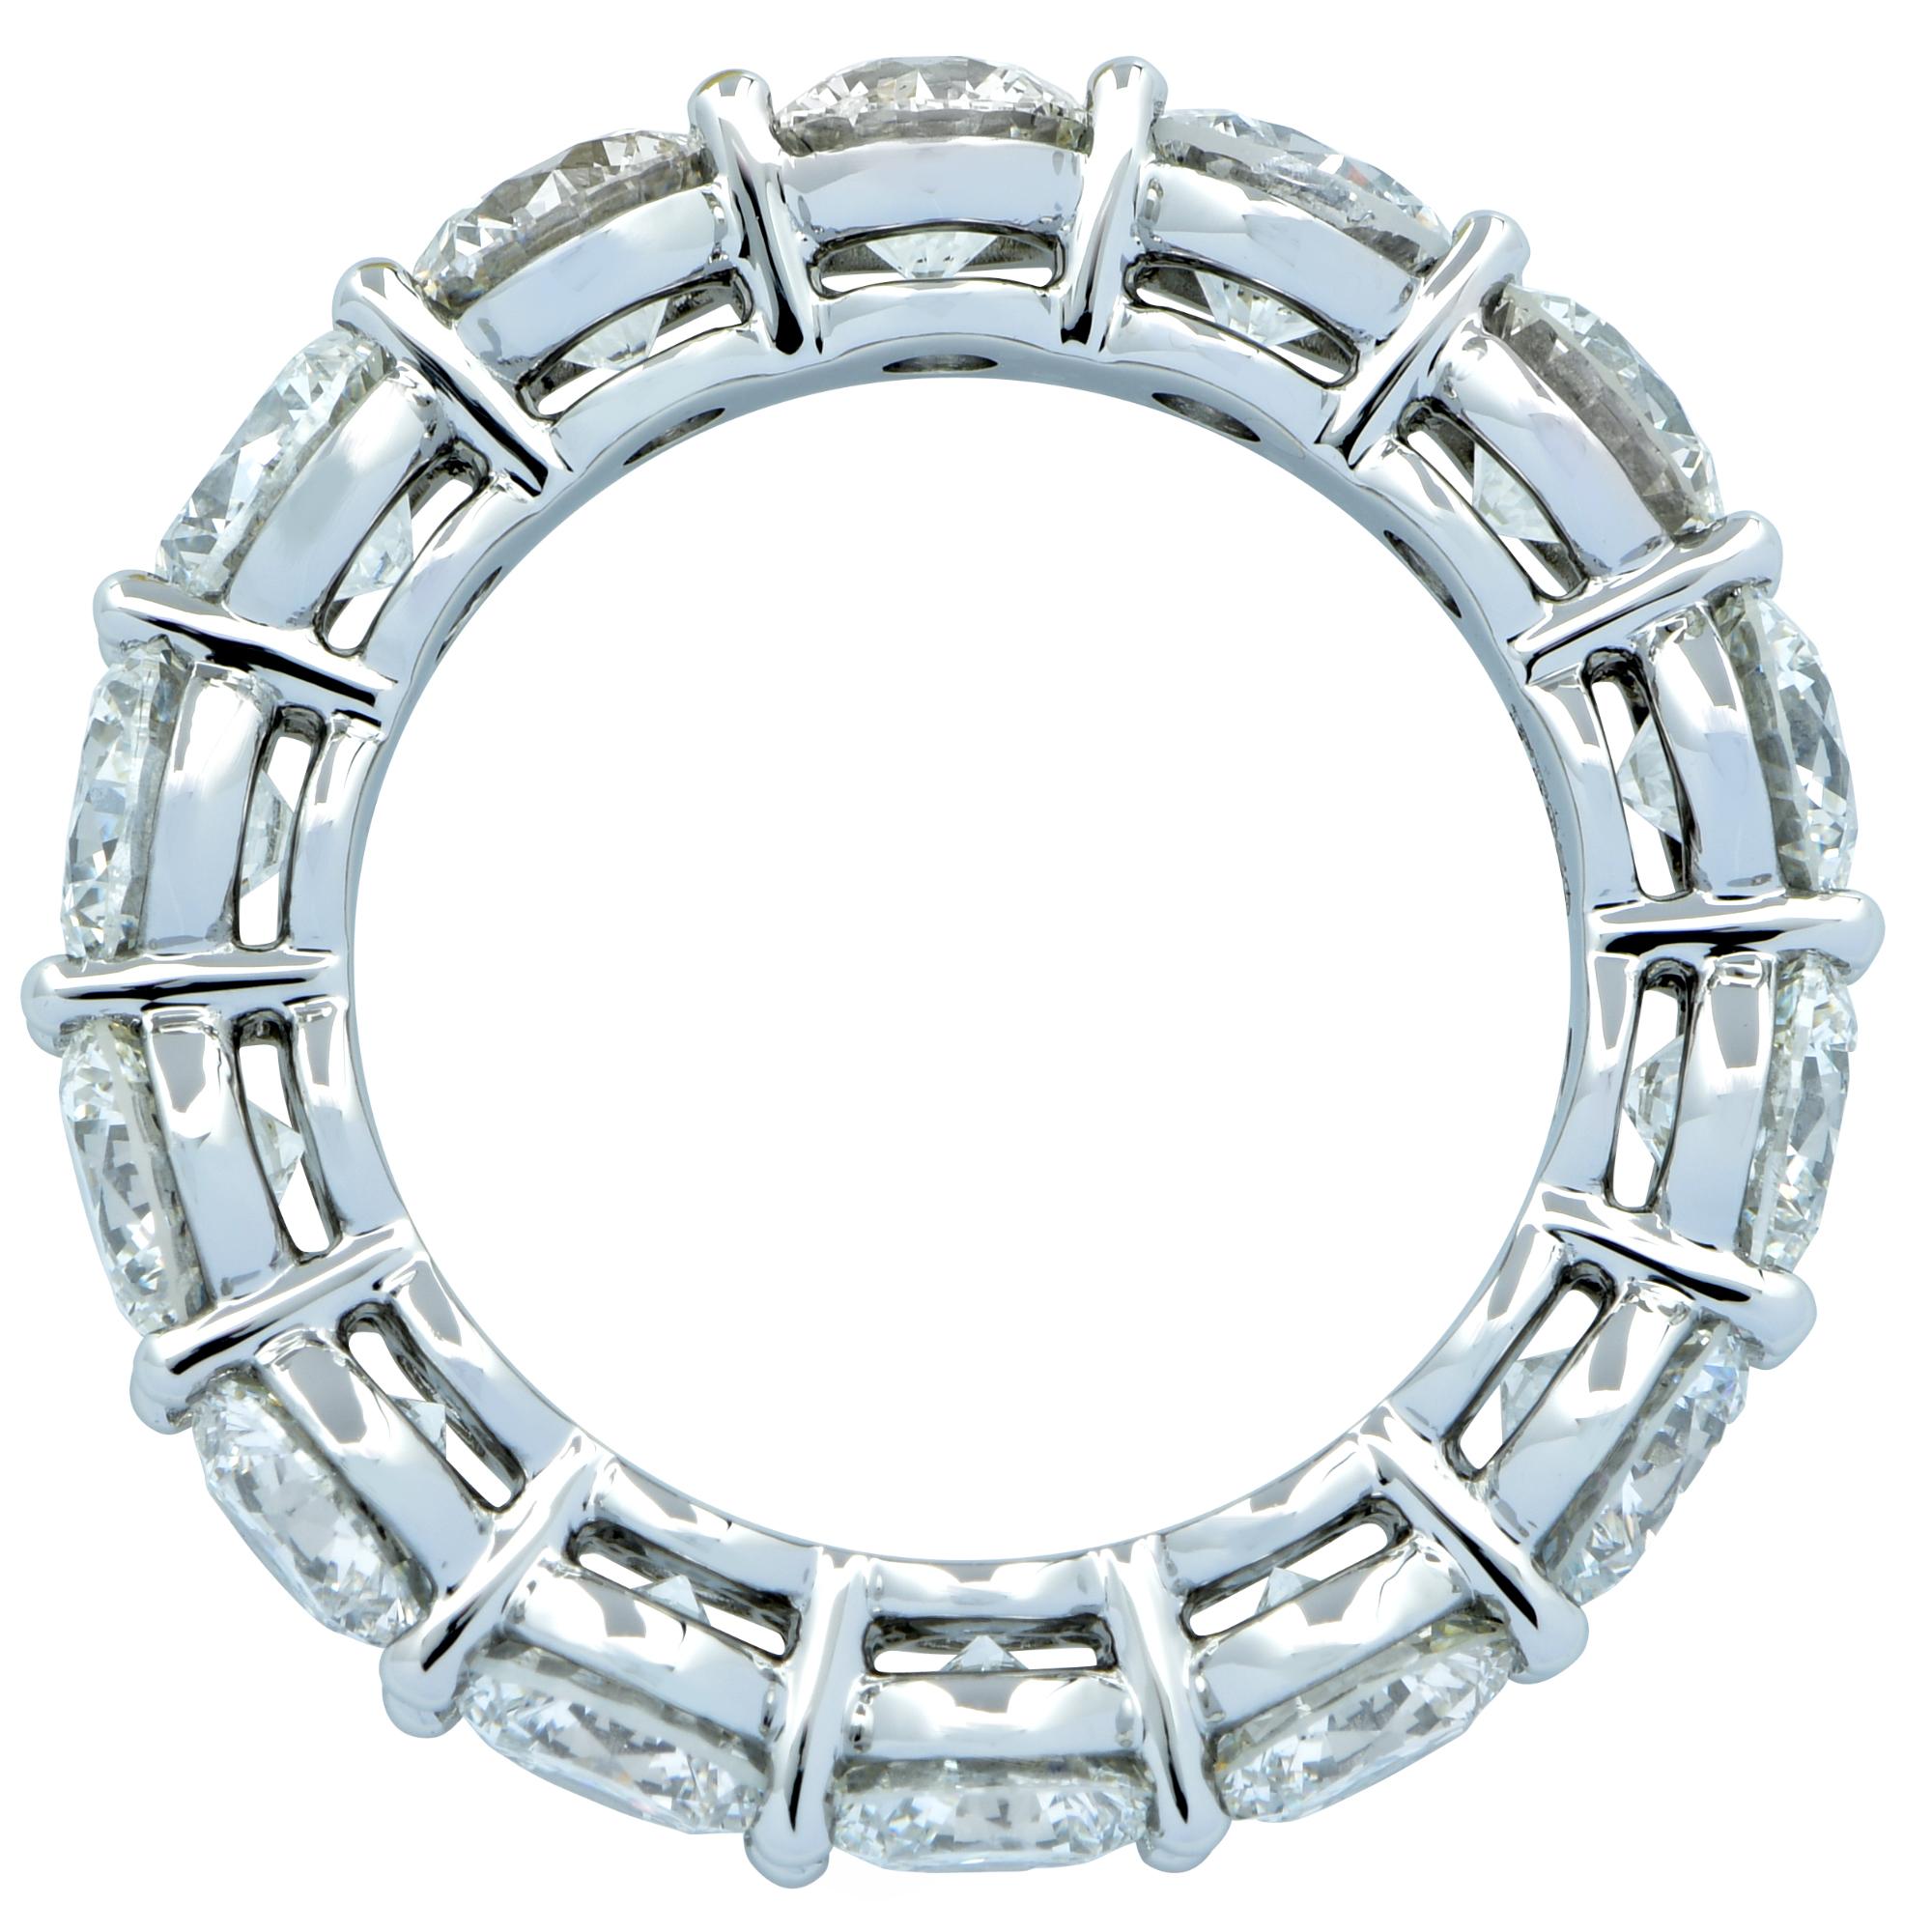 Platinum Diamond Eternity band featuring 14 round brilliant cut diamonds weighing 6.71cts F-G color and VS clarity. Finger size 6

Our pieces are all accompanied by an appraisal performed by one of our in-house GIA Graduates. They are also